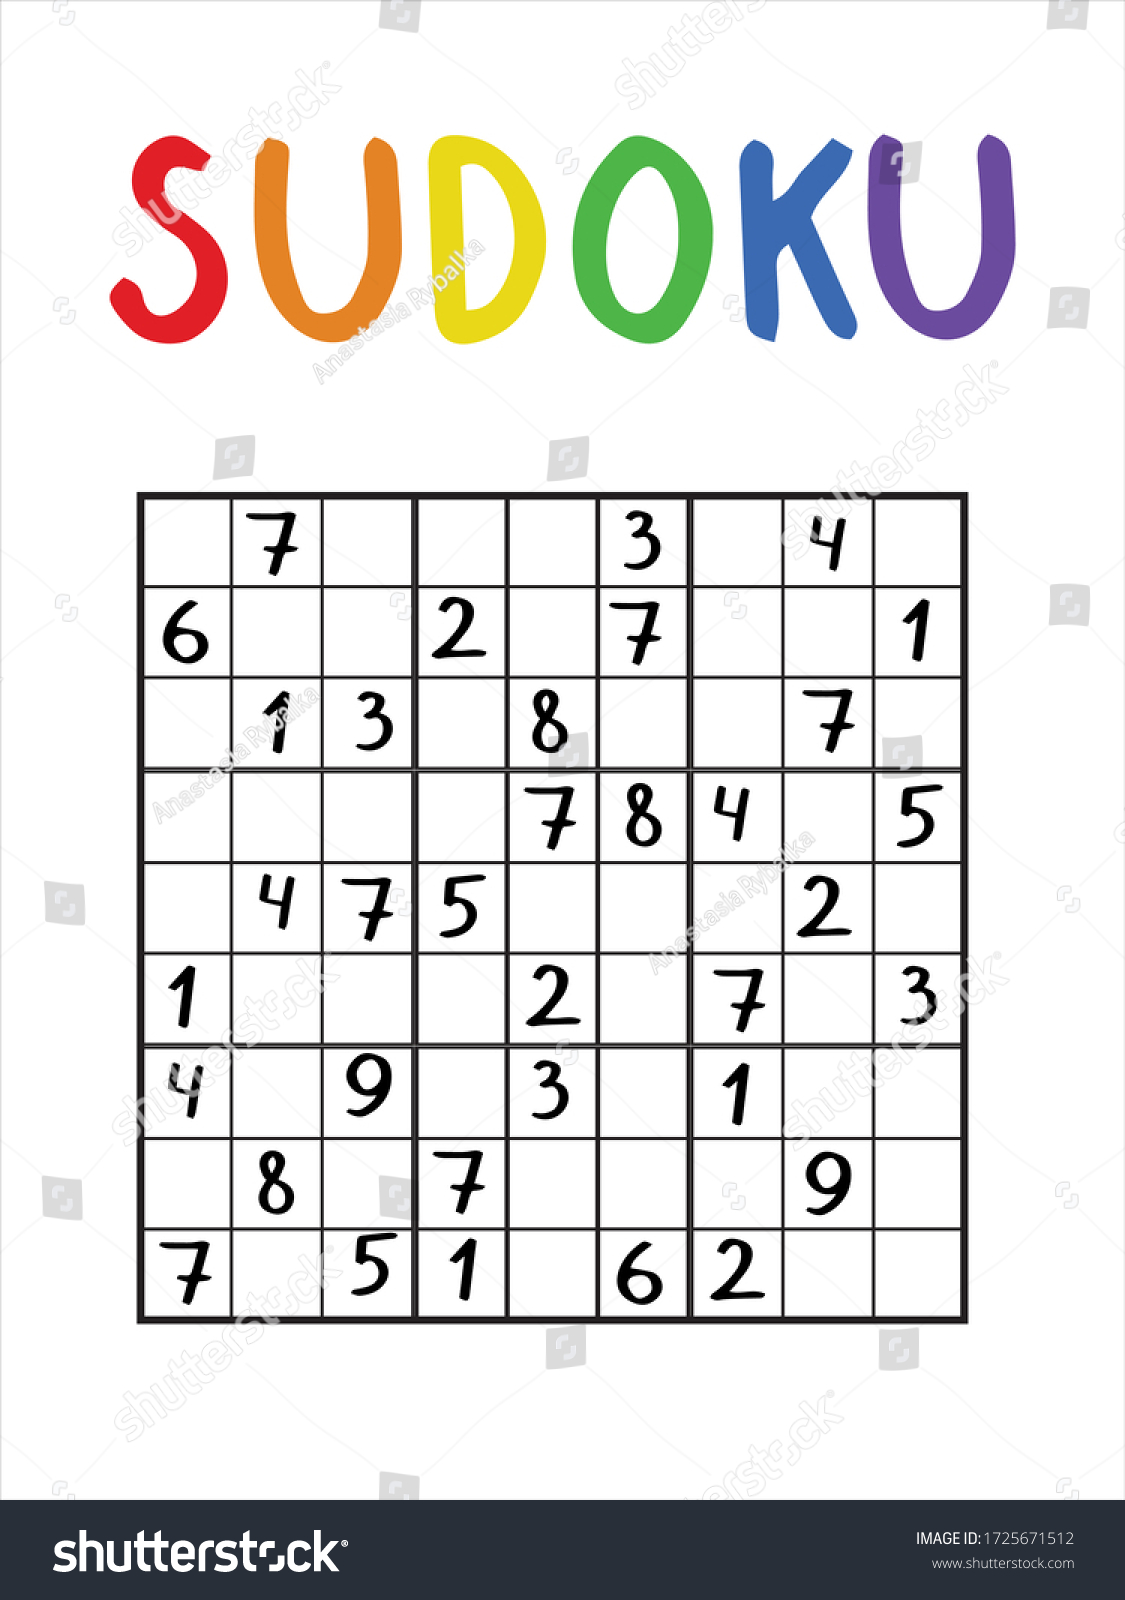 SVG of Funny sudoku game for kids and adults. Number logic game for medium level. Black outline isolated on white with colorful title. Sudoku puzzle stock vector illustration. Printable vector jigsaw sheet. svg